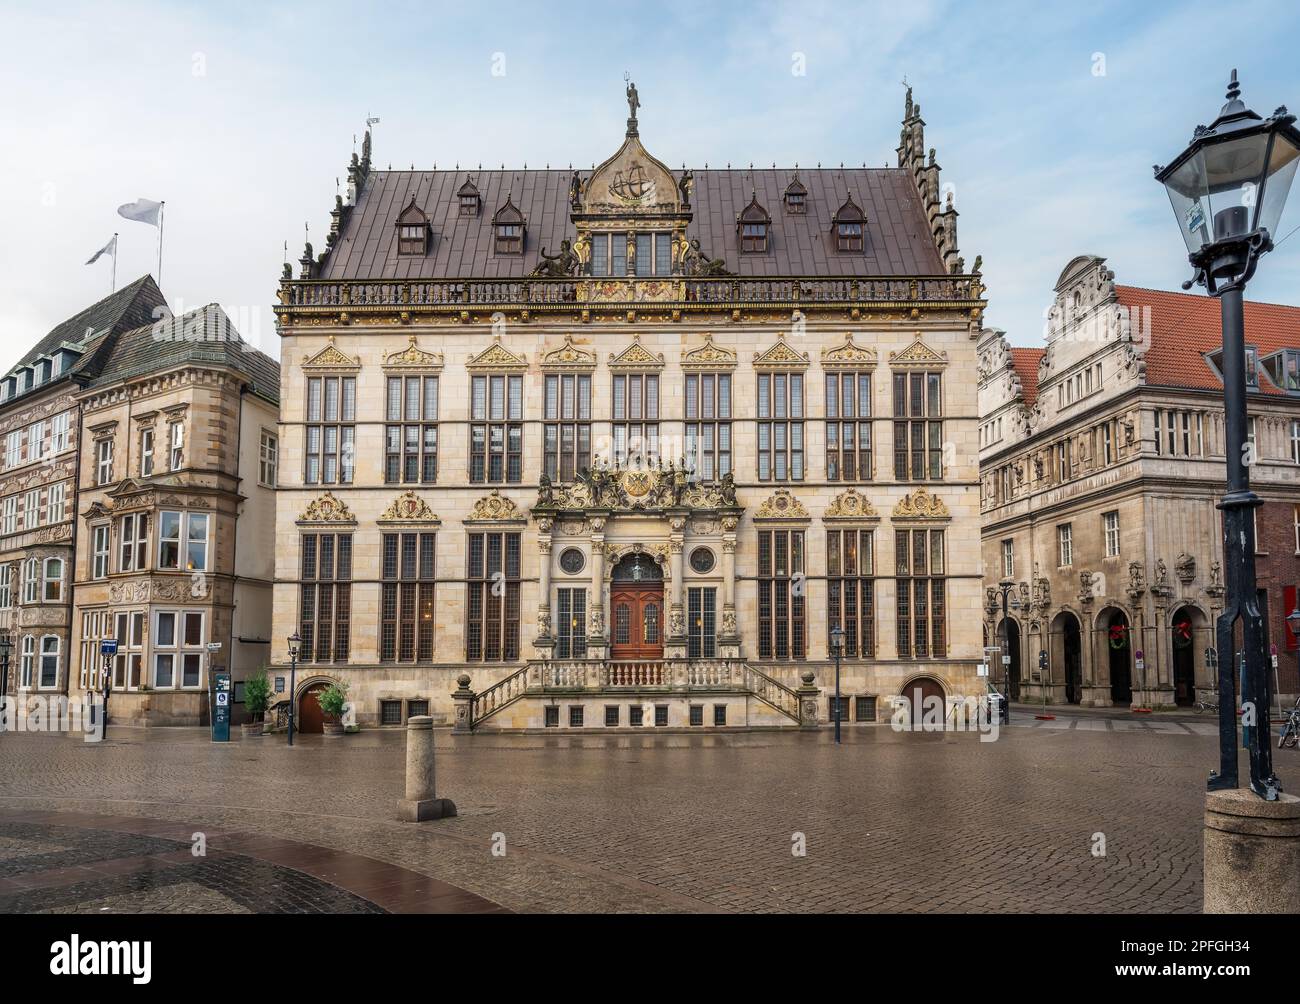 Schutting Building at Market Square - Bremen Chamber of Commerce - Bremen, Germany Stock Photo